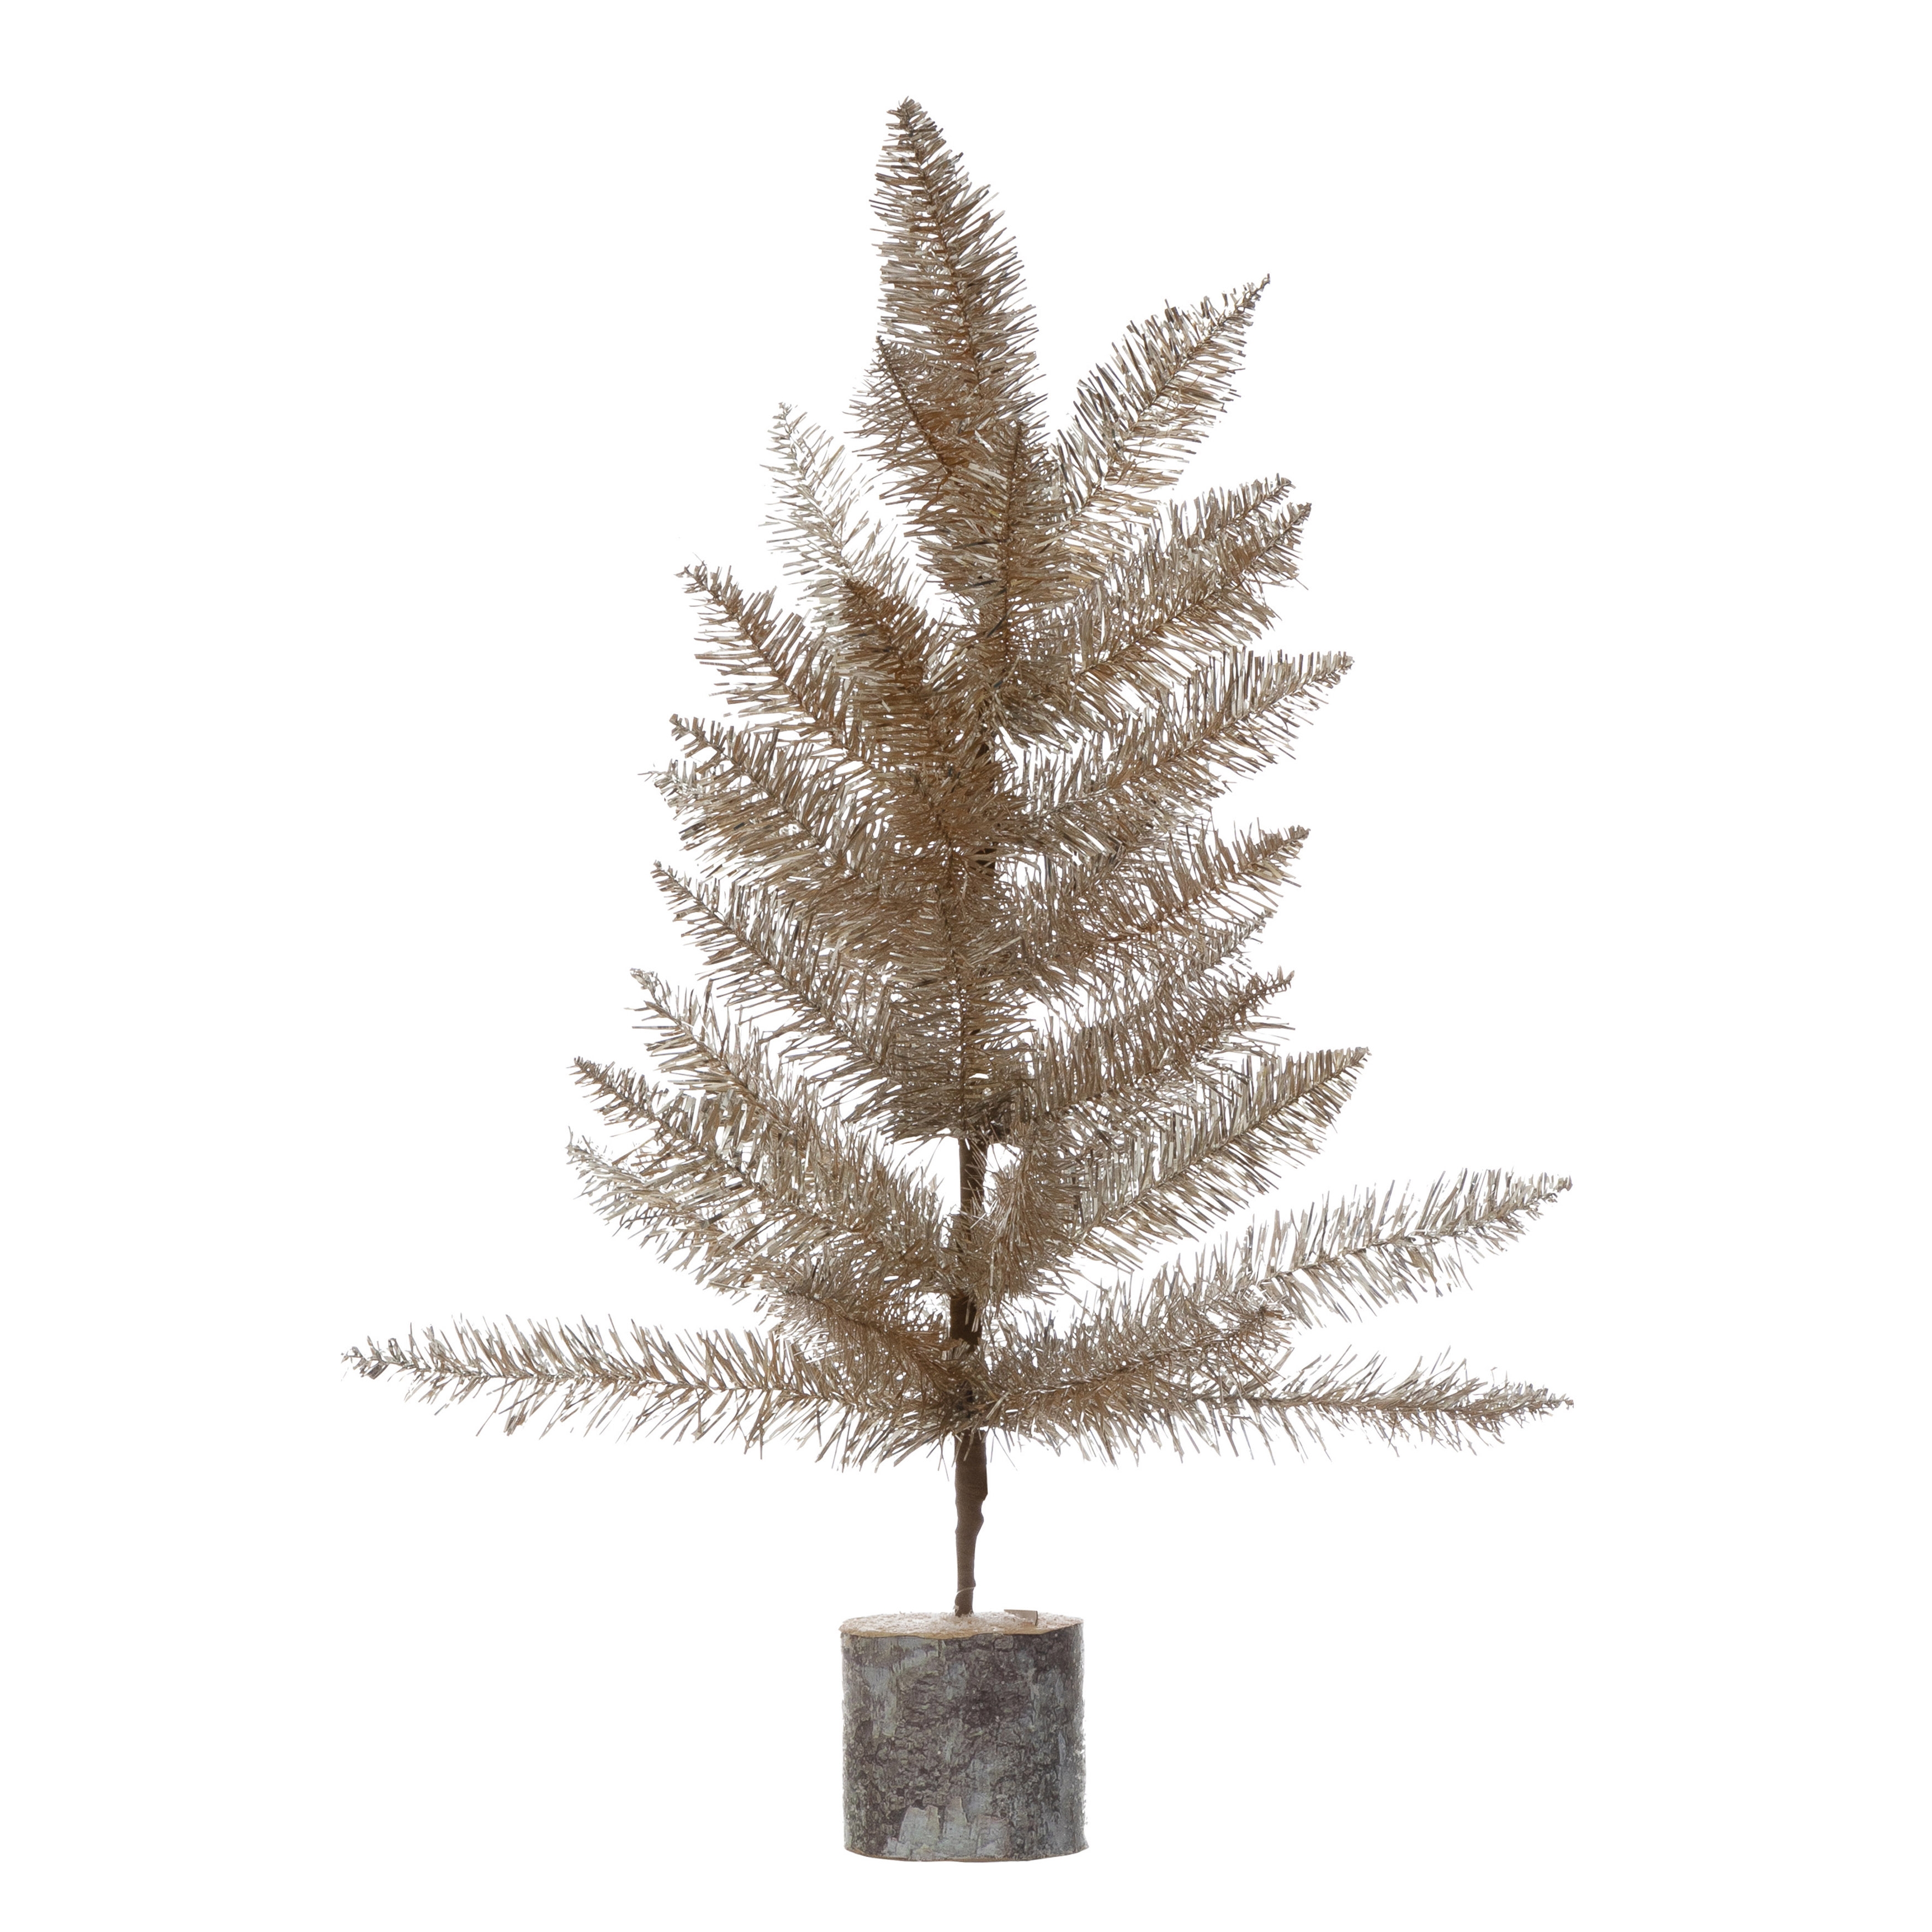 Tinsel Tree with Wood Slice Base, Silver & Gold Finish - Image 0